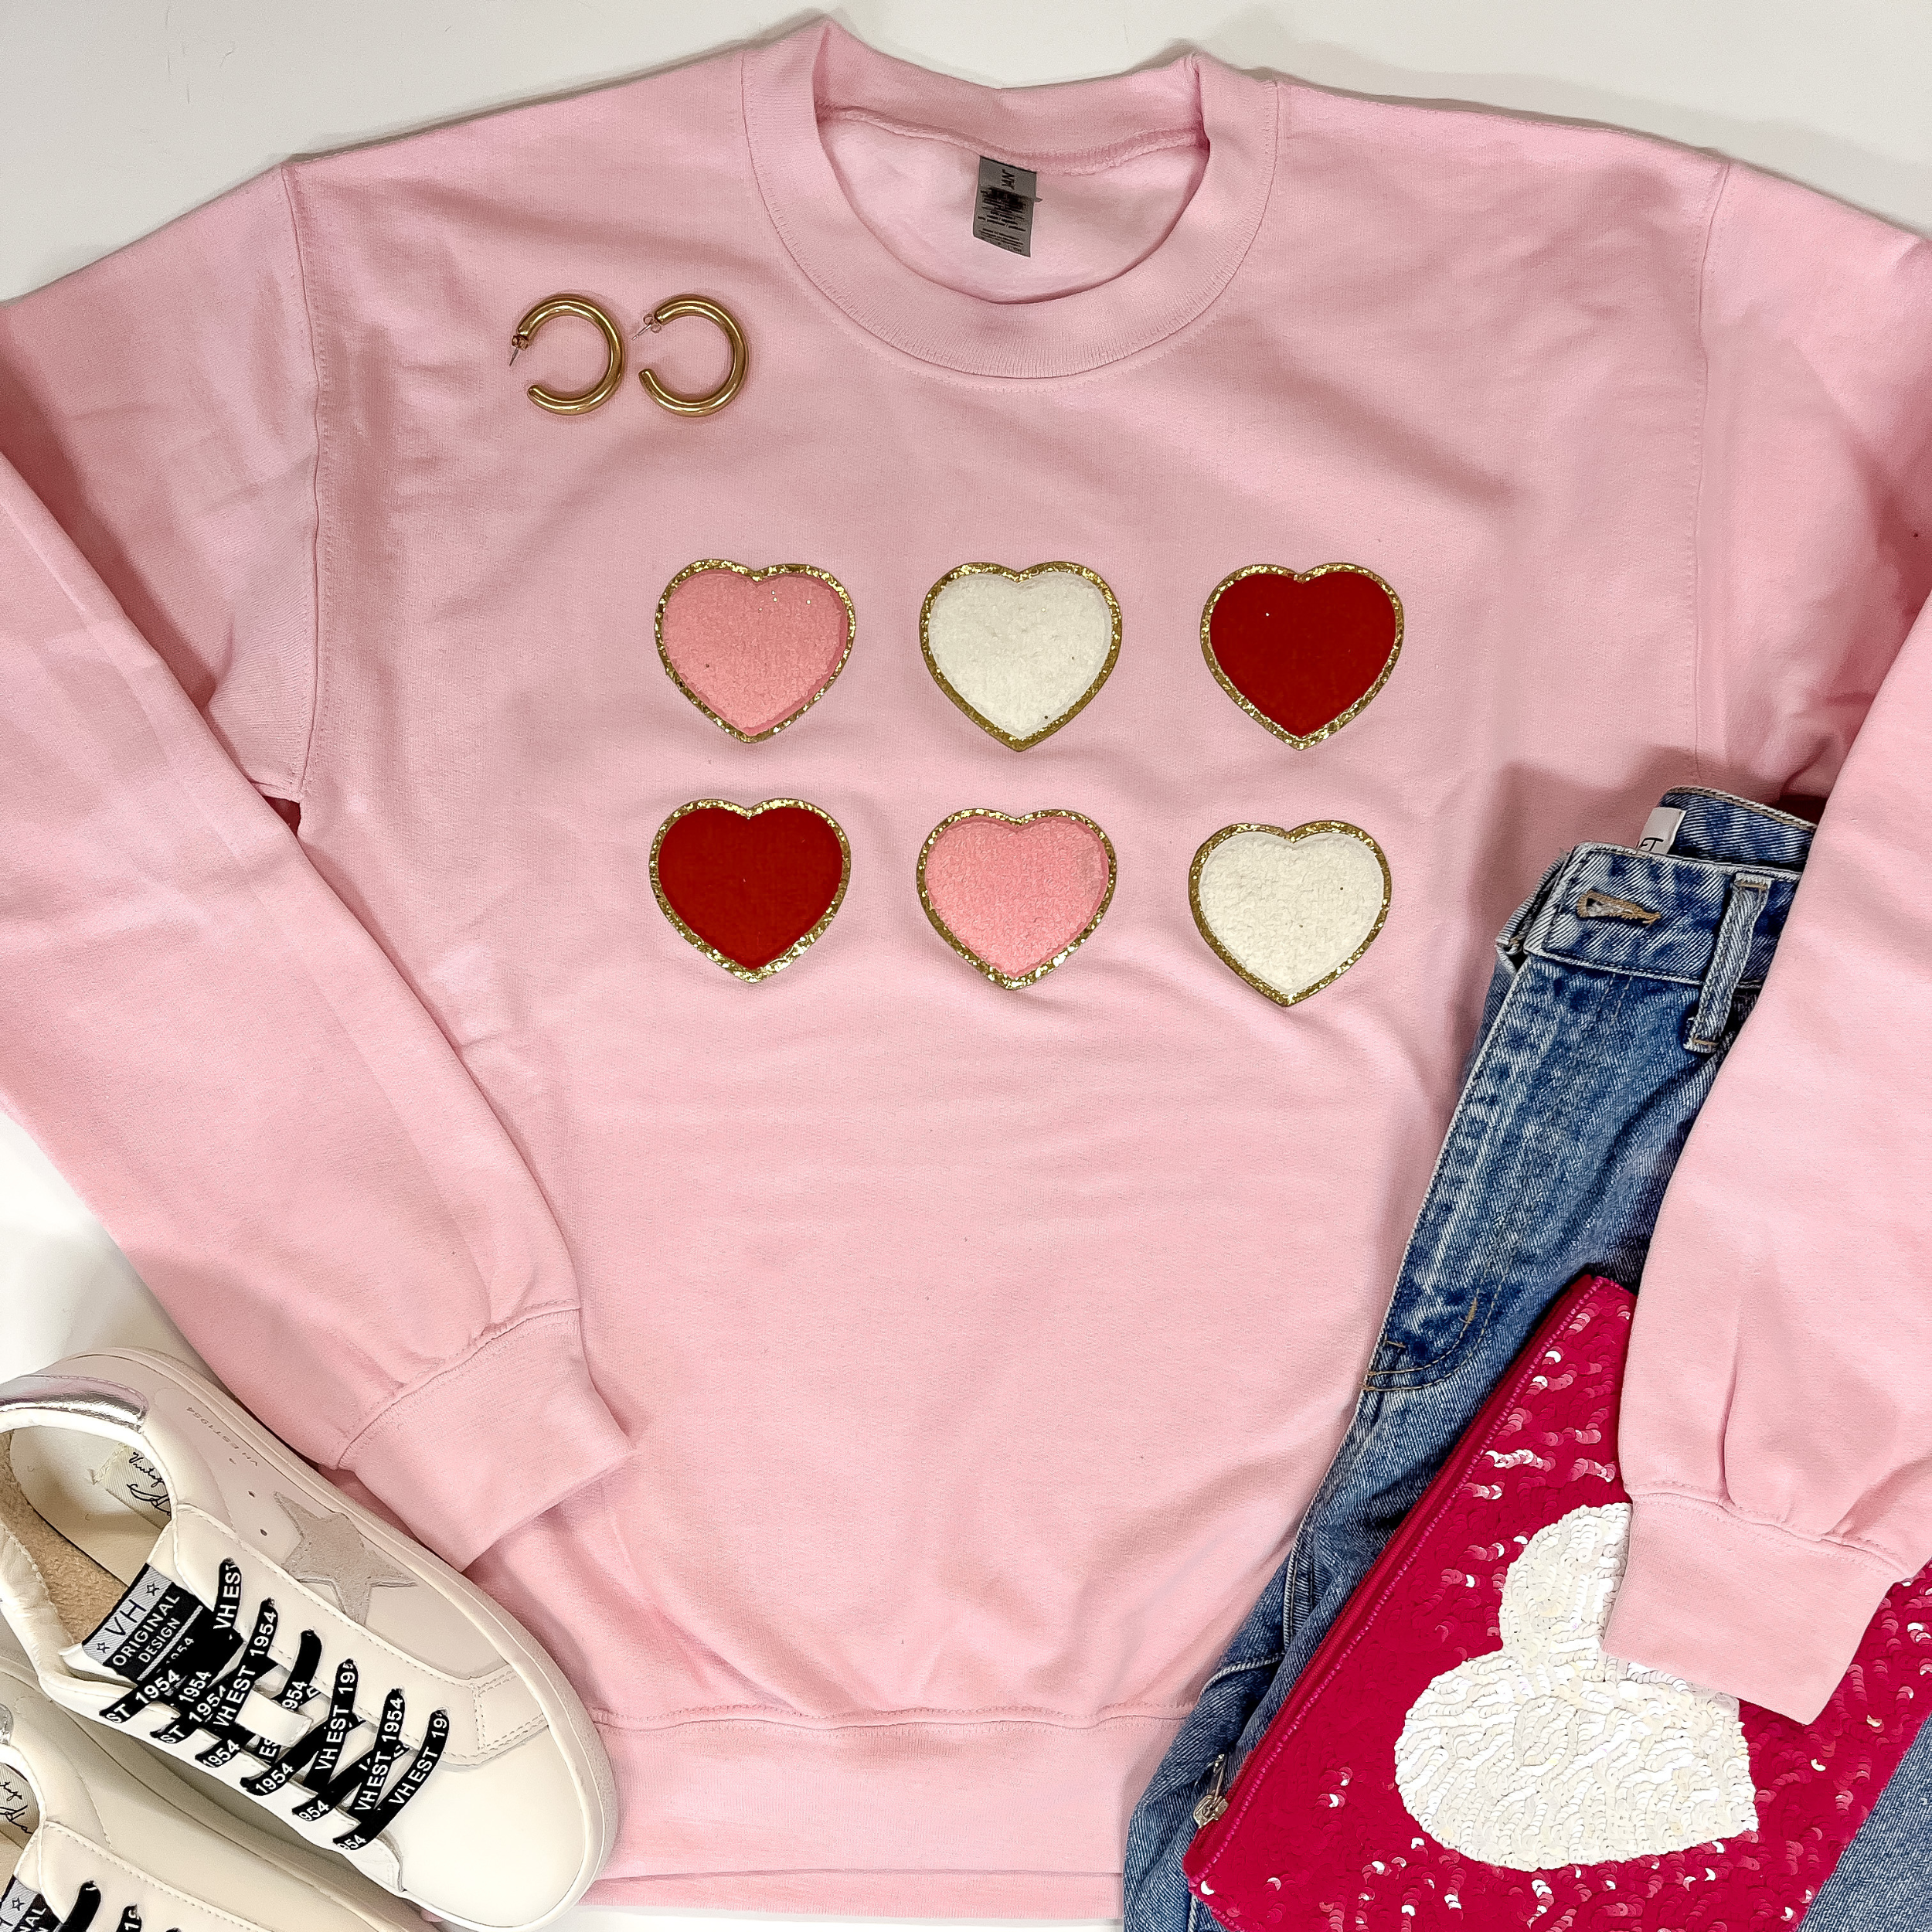 Lots Of Love Chenille Heart Graphic Sweatshirt with Long Sleeves in Light Pink - Giddy Up Glamour Boutique